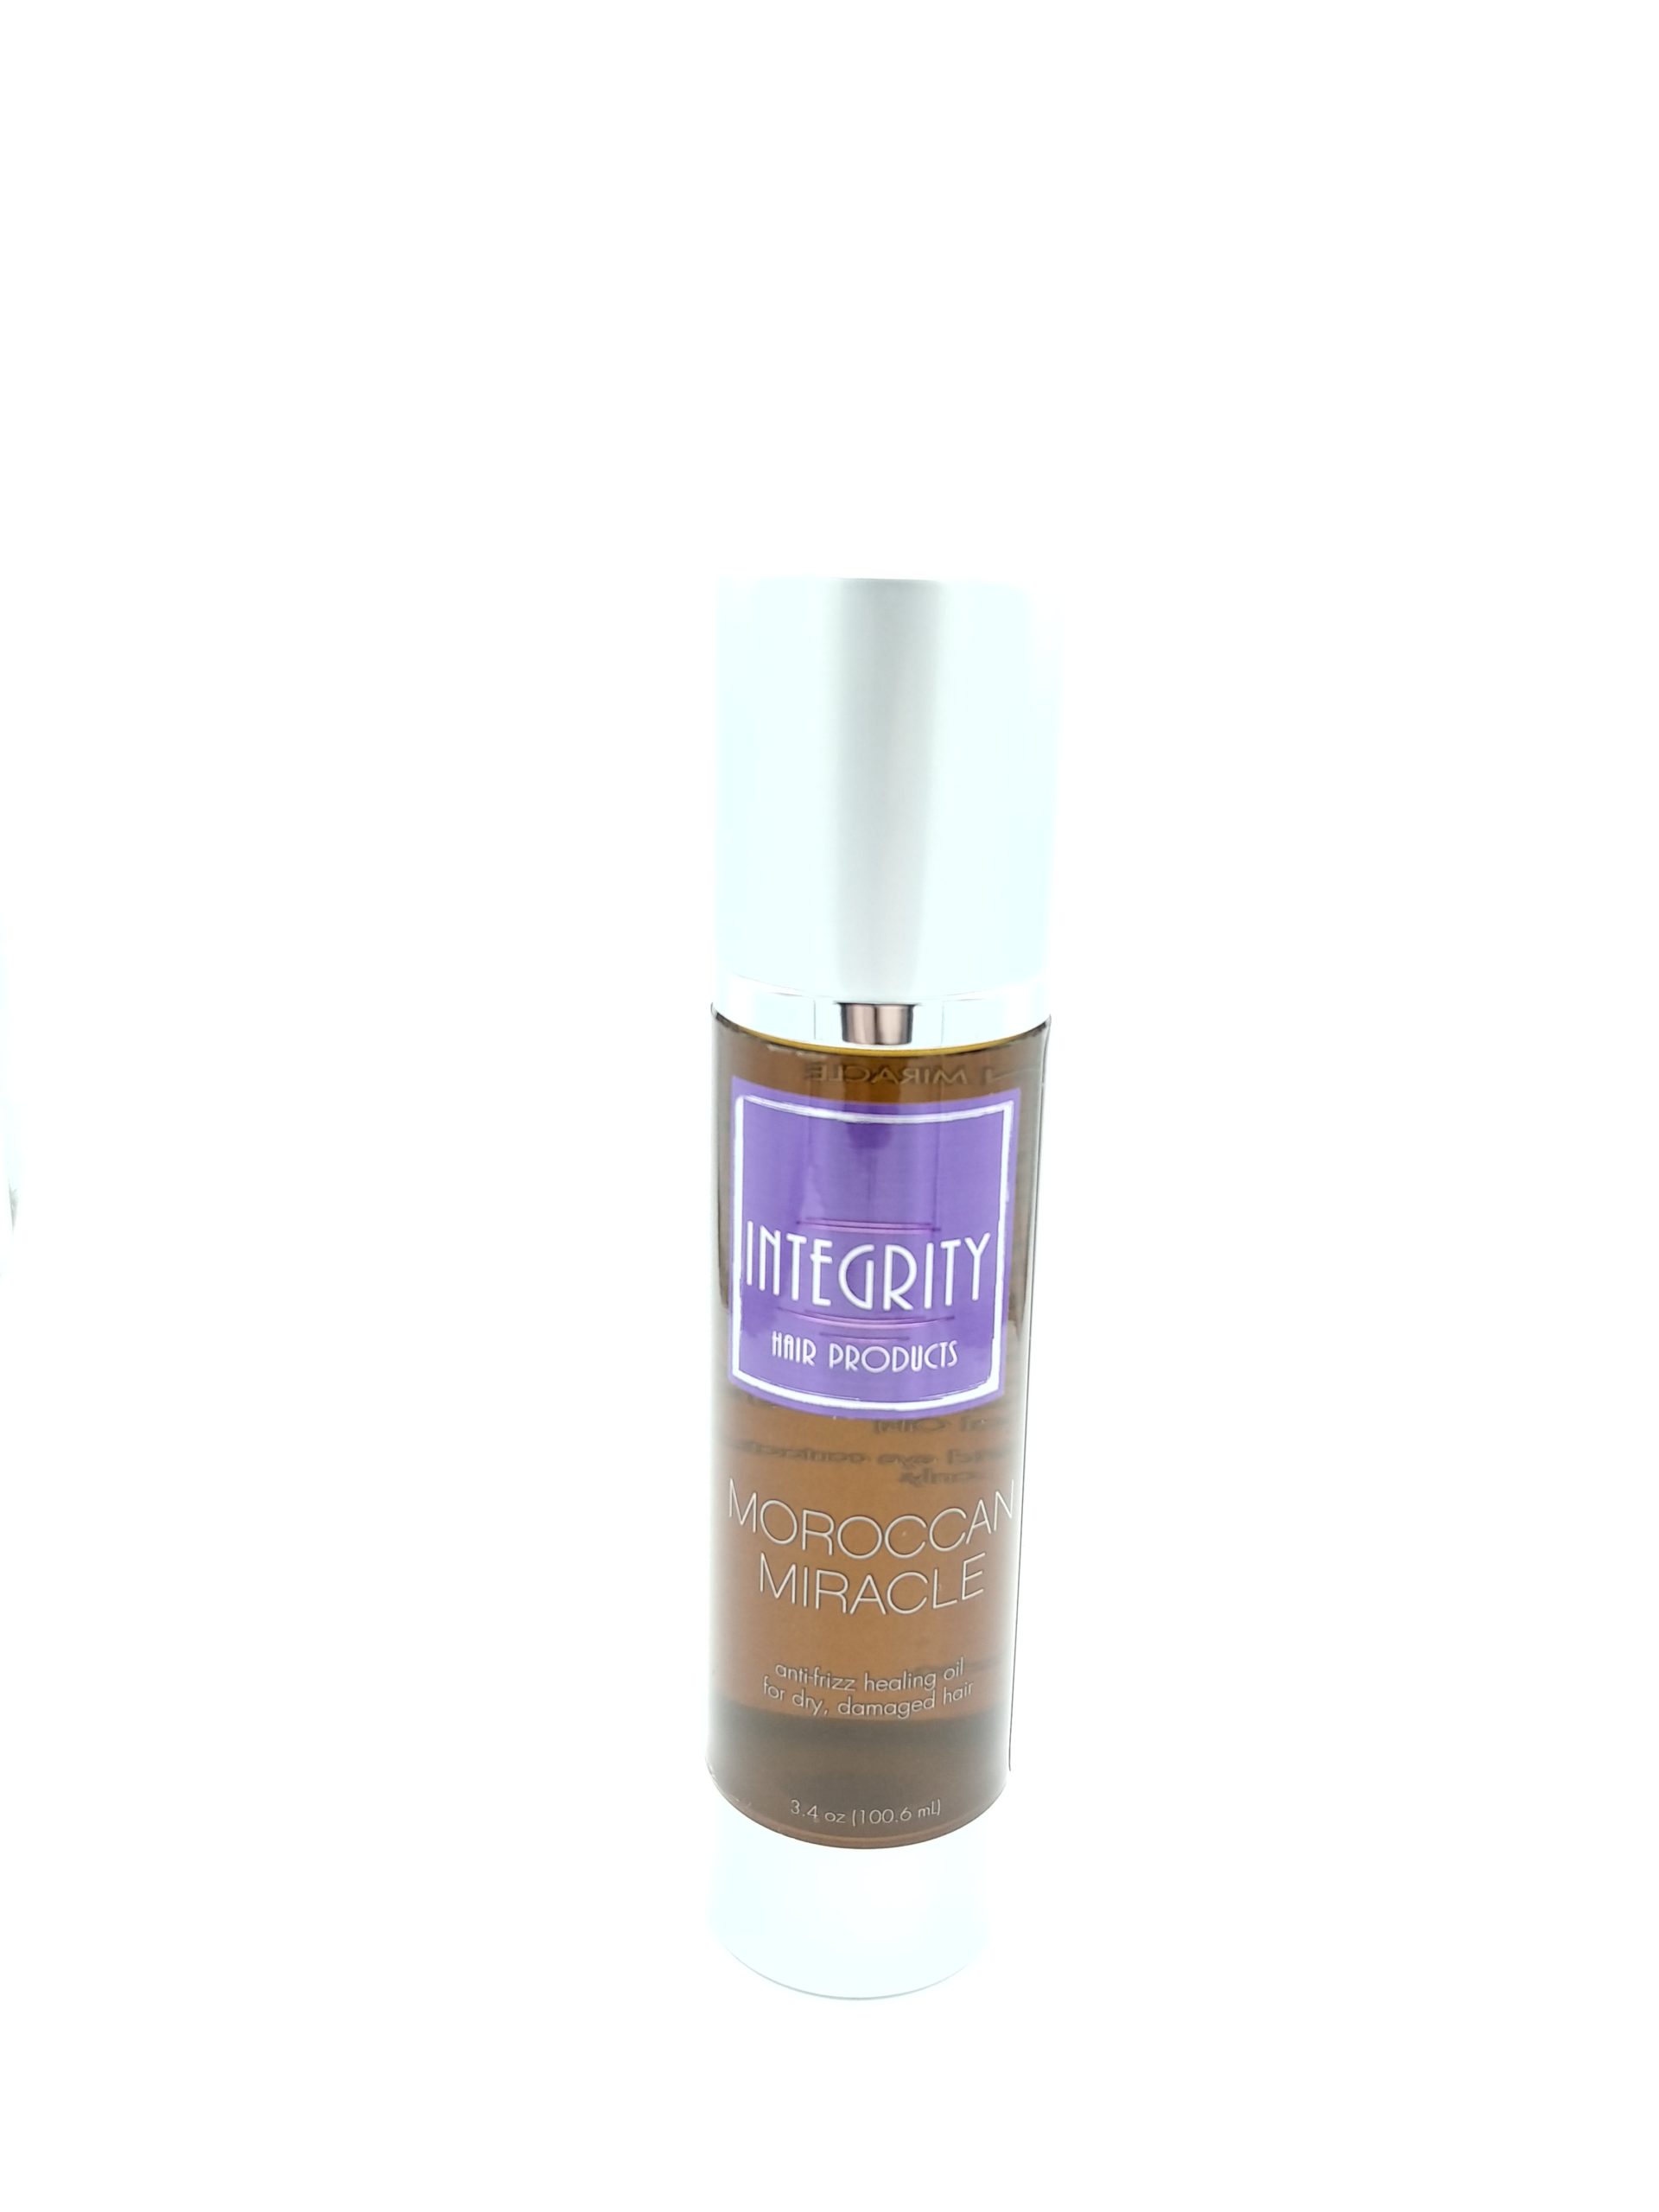 Integrity Moroccan Miracle Oil 3.4 oz